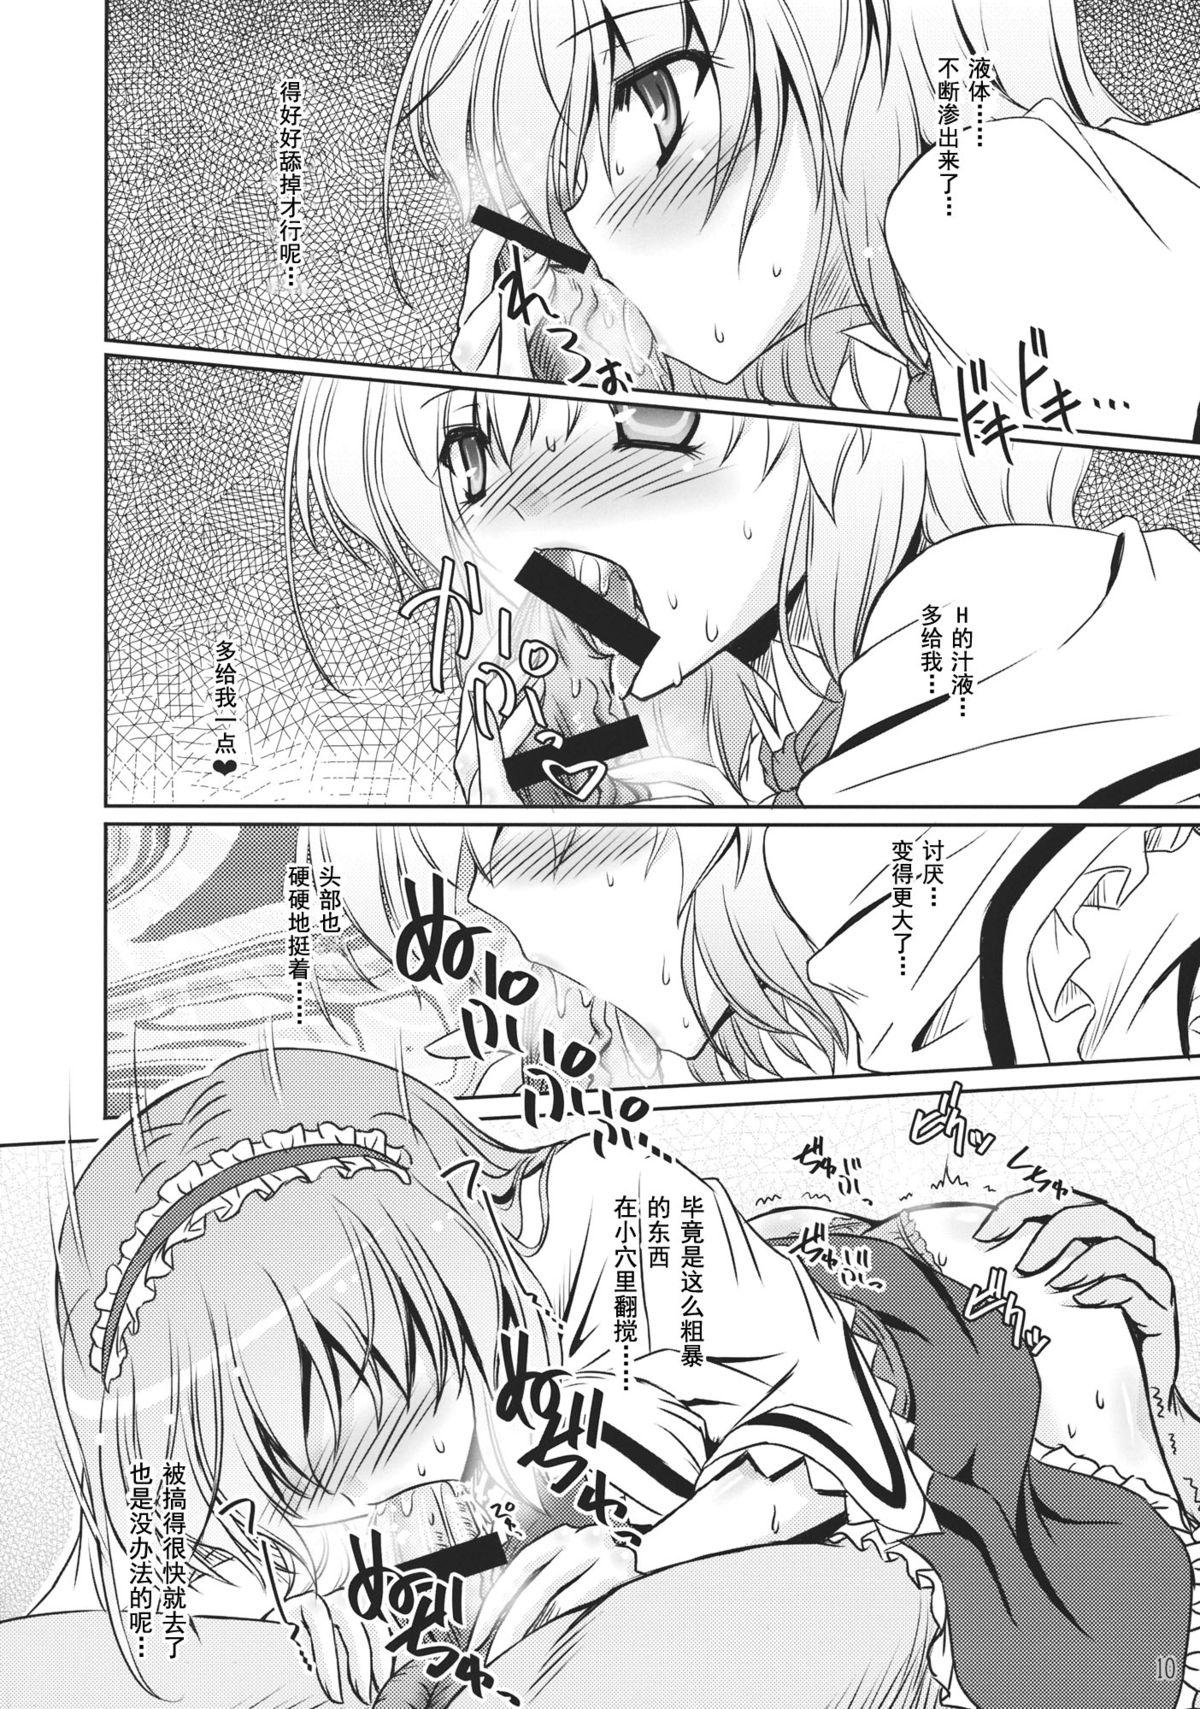 Gaydudes Loose Strings - Touhou project Girl Sucking Dick - Page 10